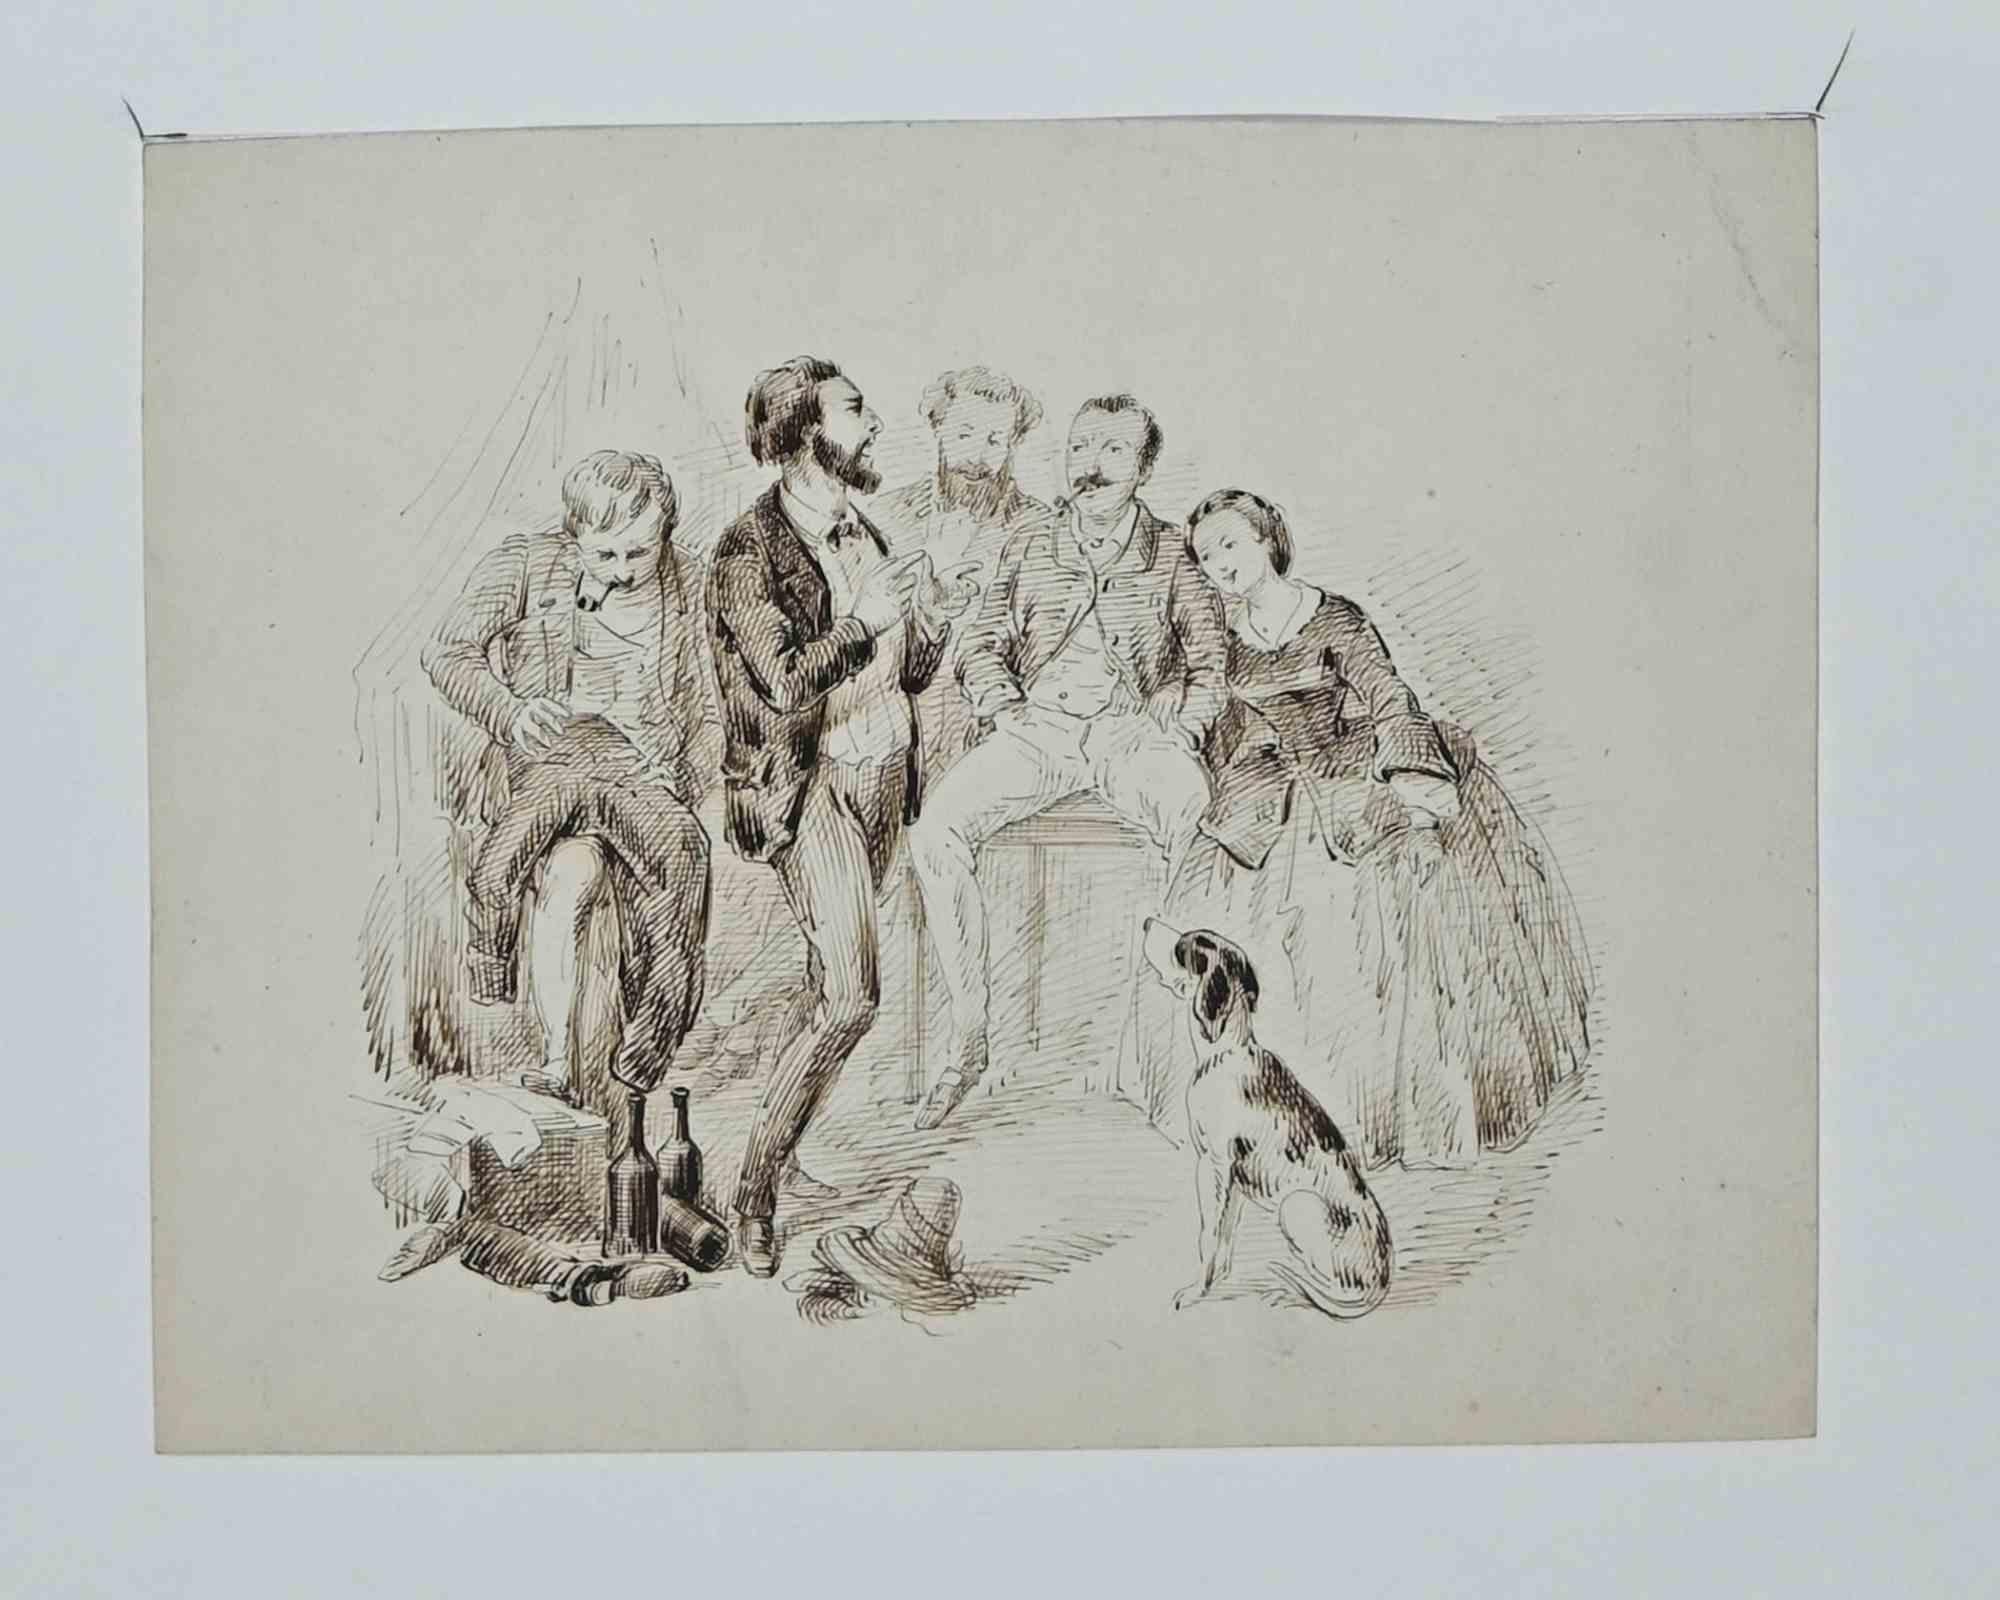 Alfred Grevin Figurative Art - Gathering - Original Drawing by Alfred Grévin - Late-19 Century